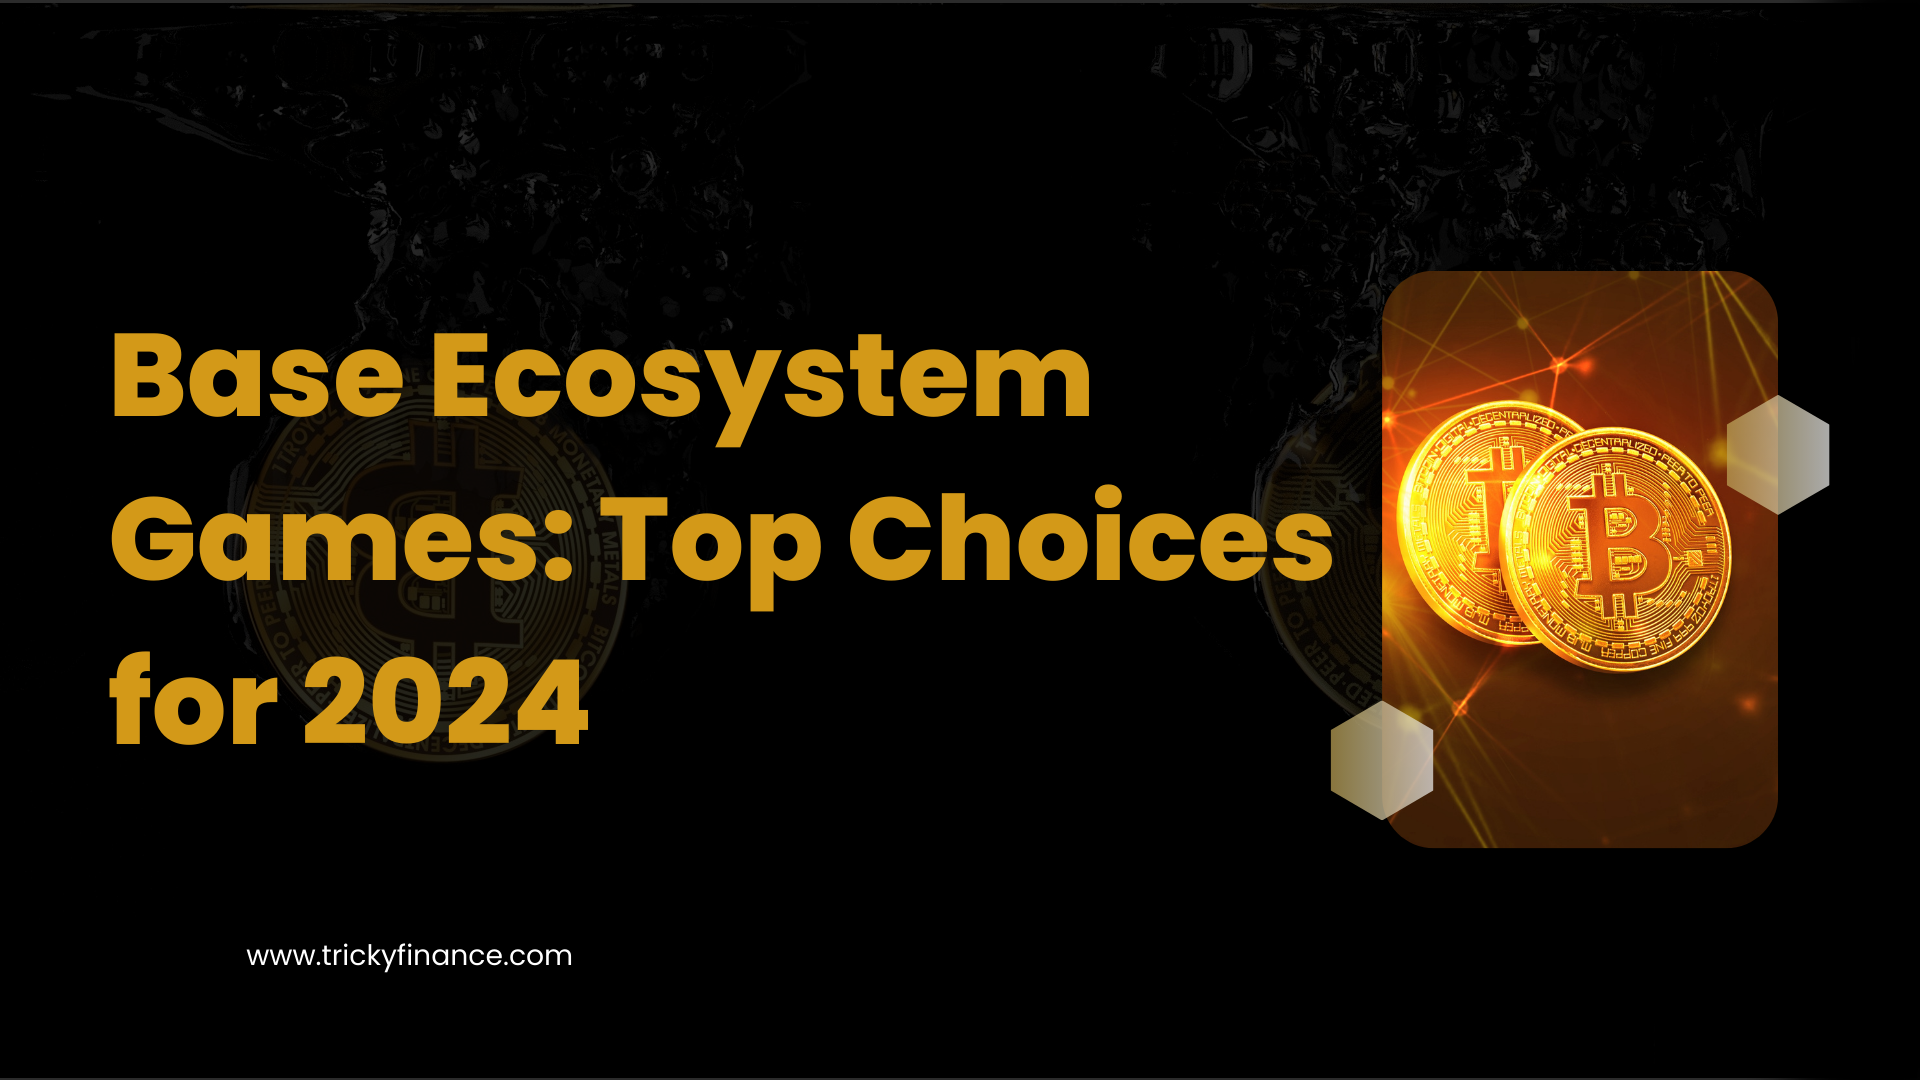 Base Ecosystem Games: Top Choices for 2024